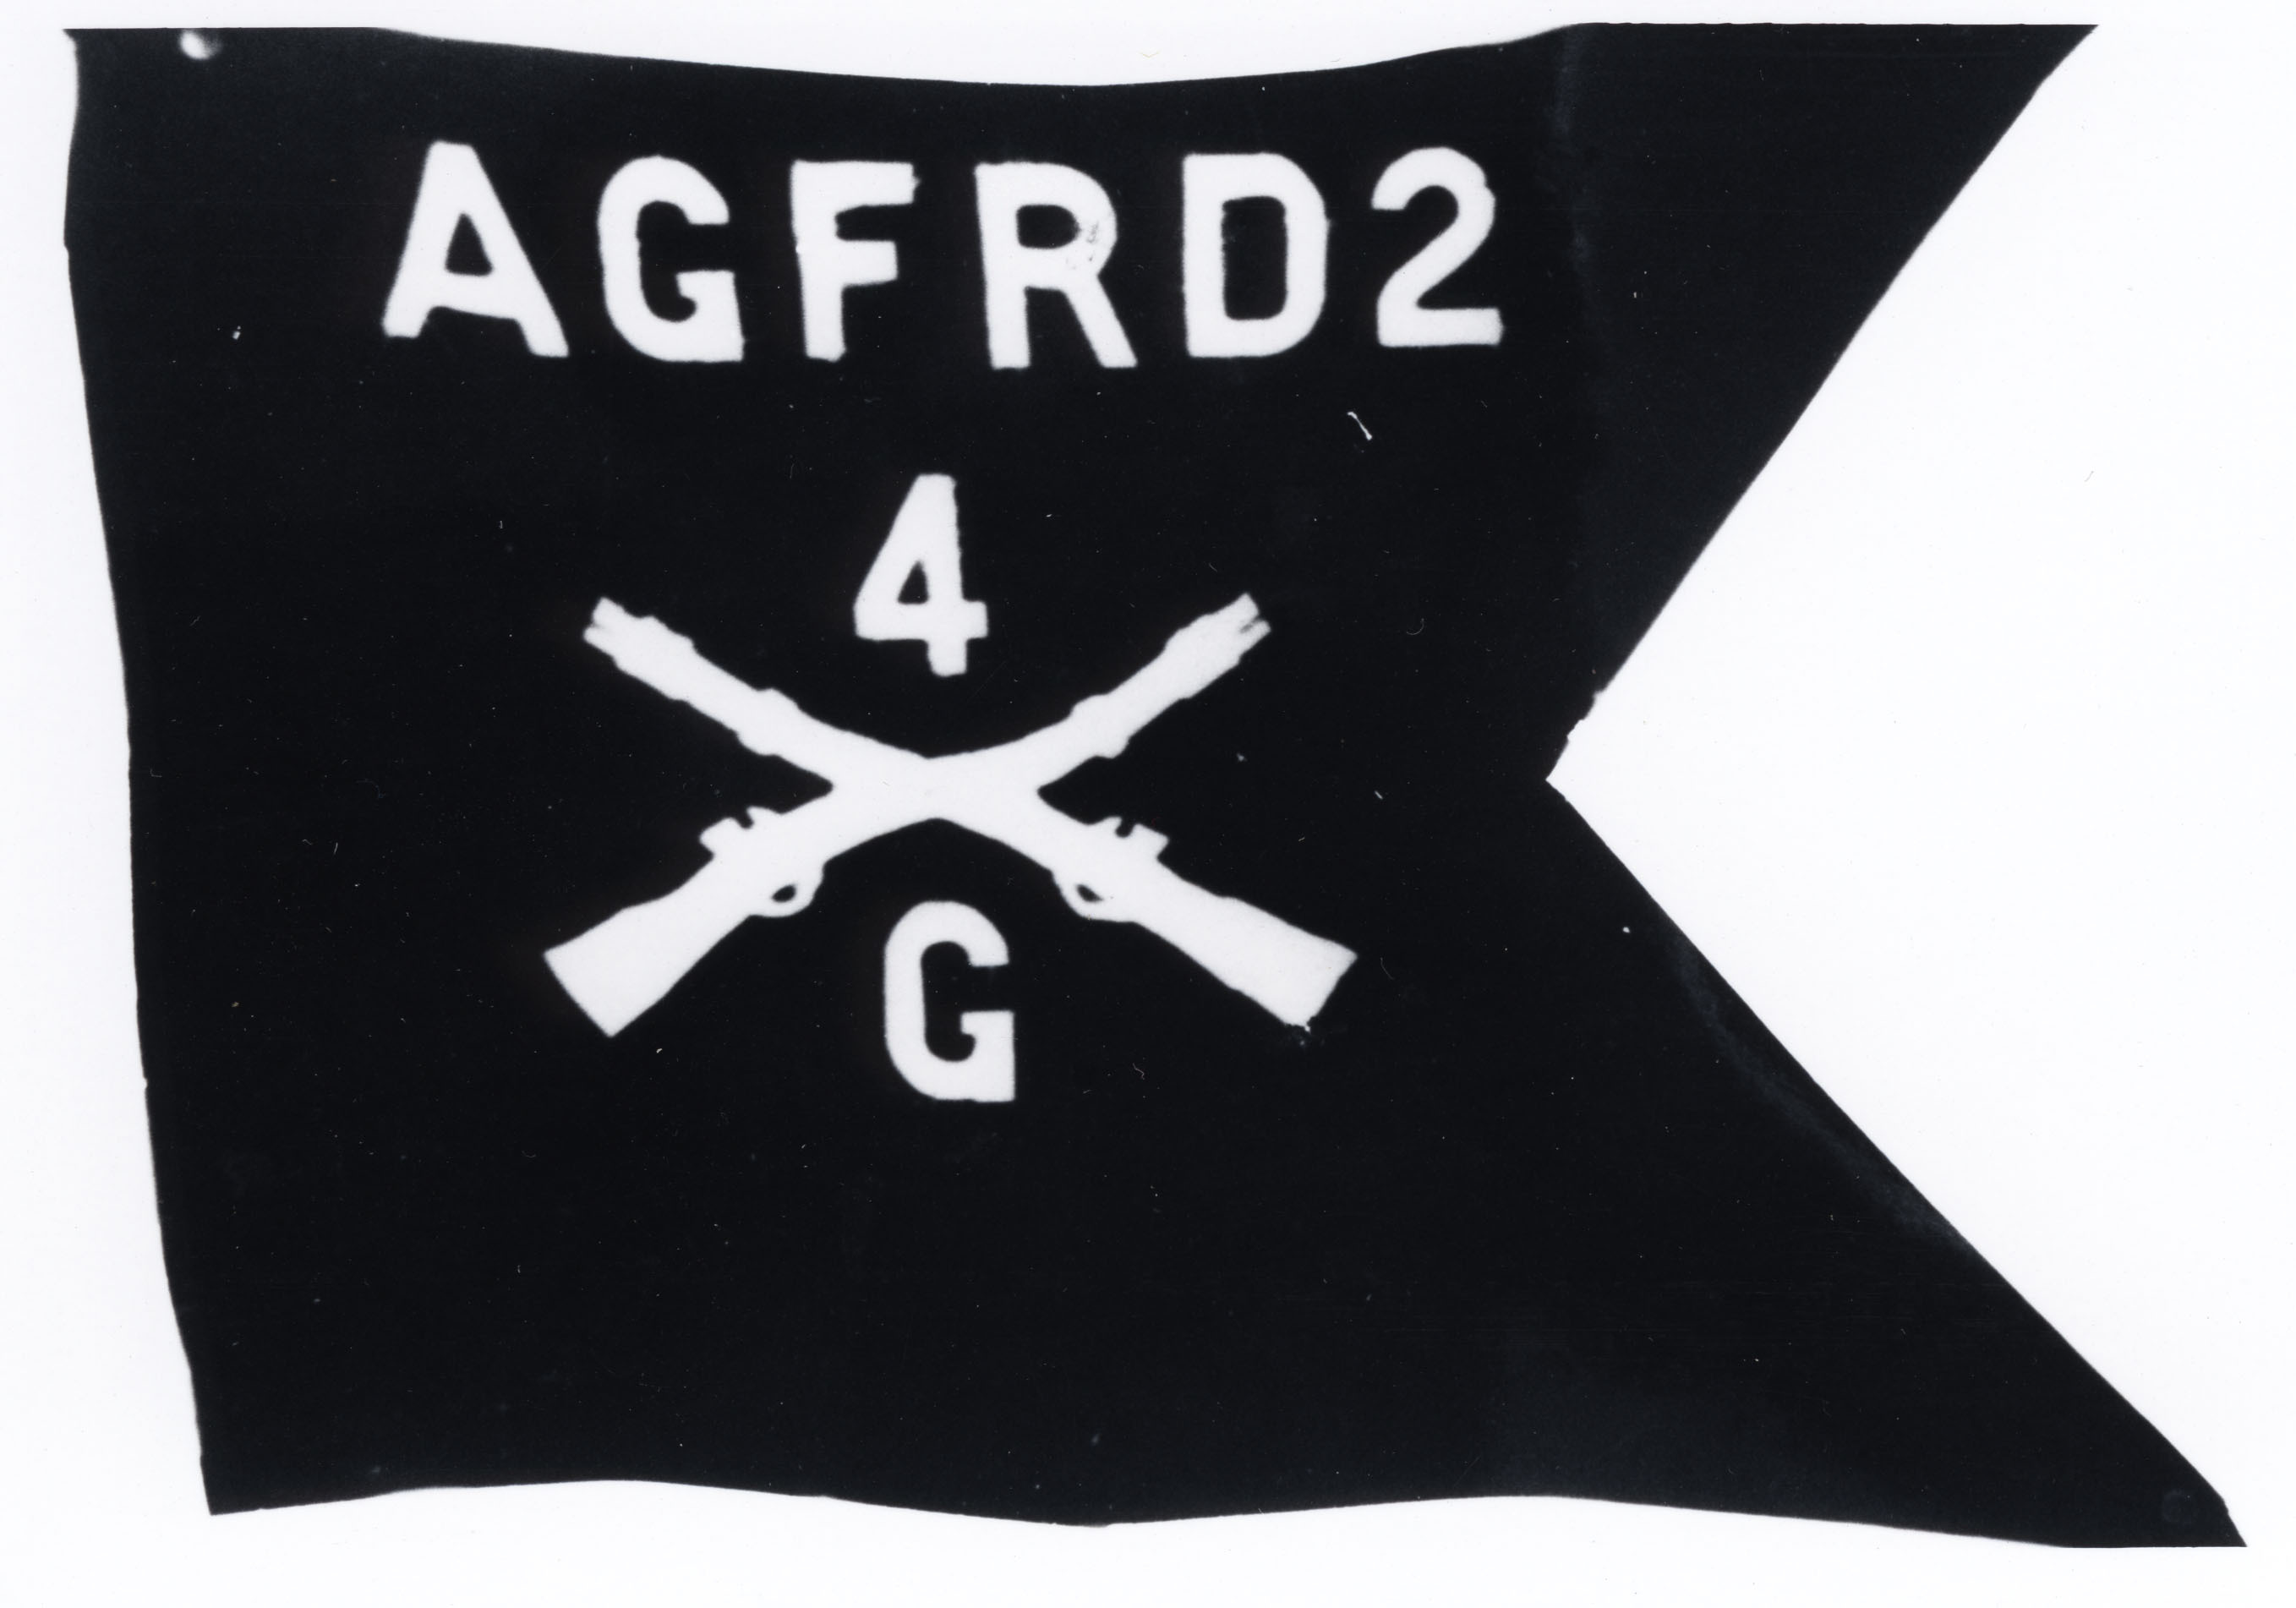 Black and white photograph of a guidon flag with text reading "AGFRD2" and two crossed rifles with "4" and "G"